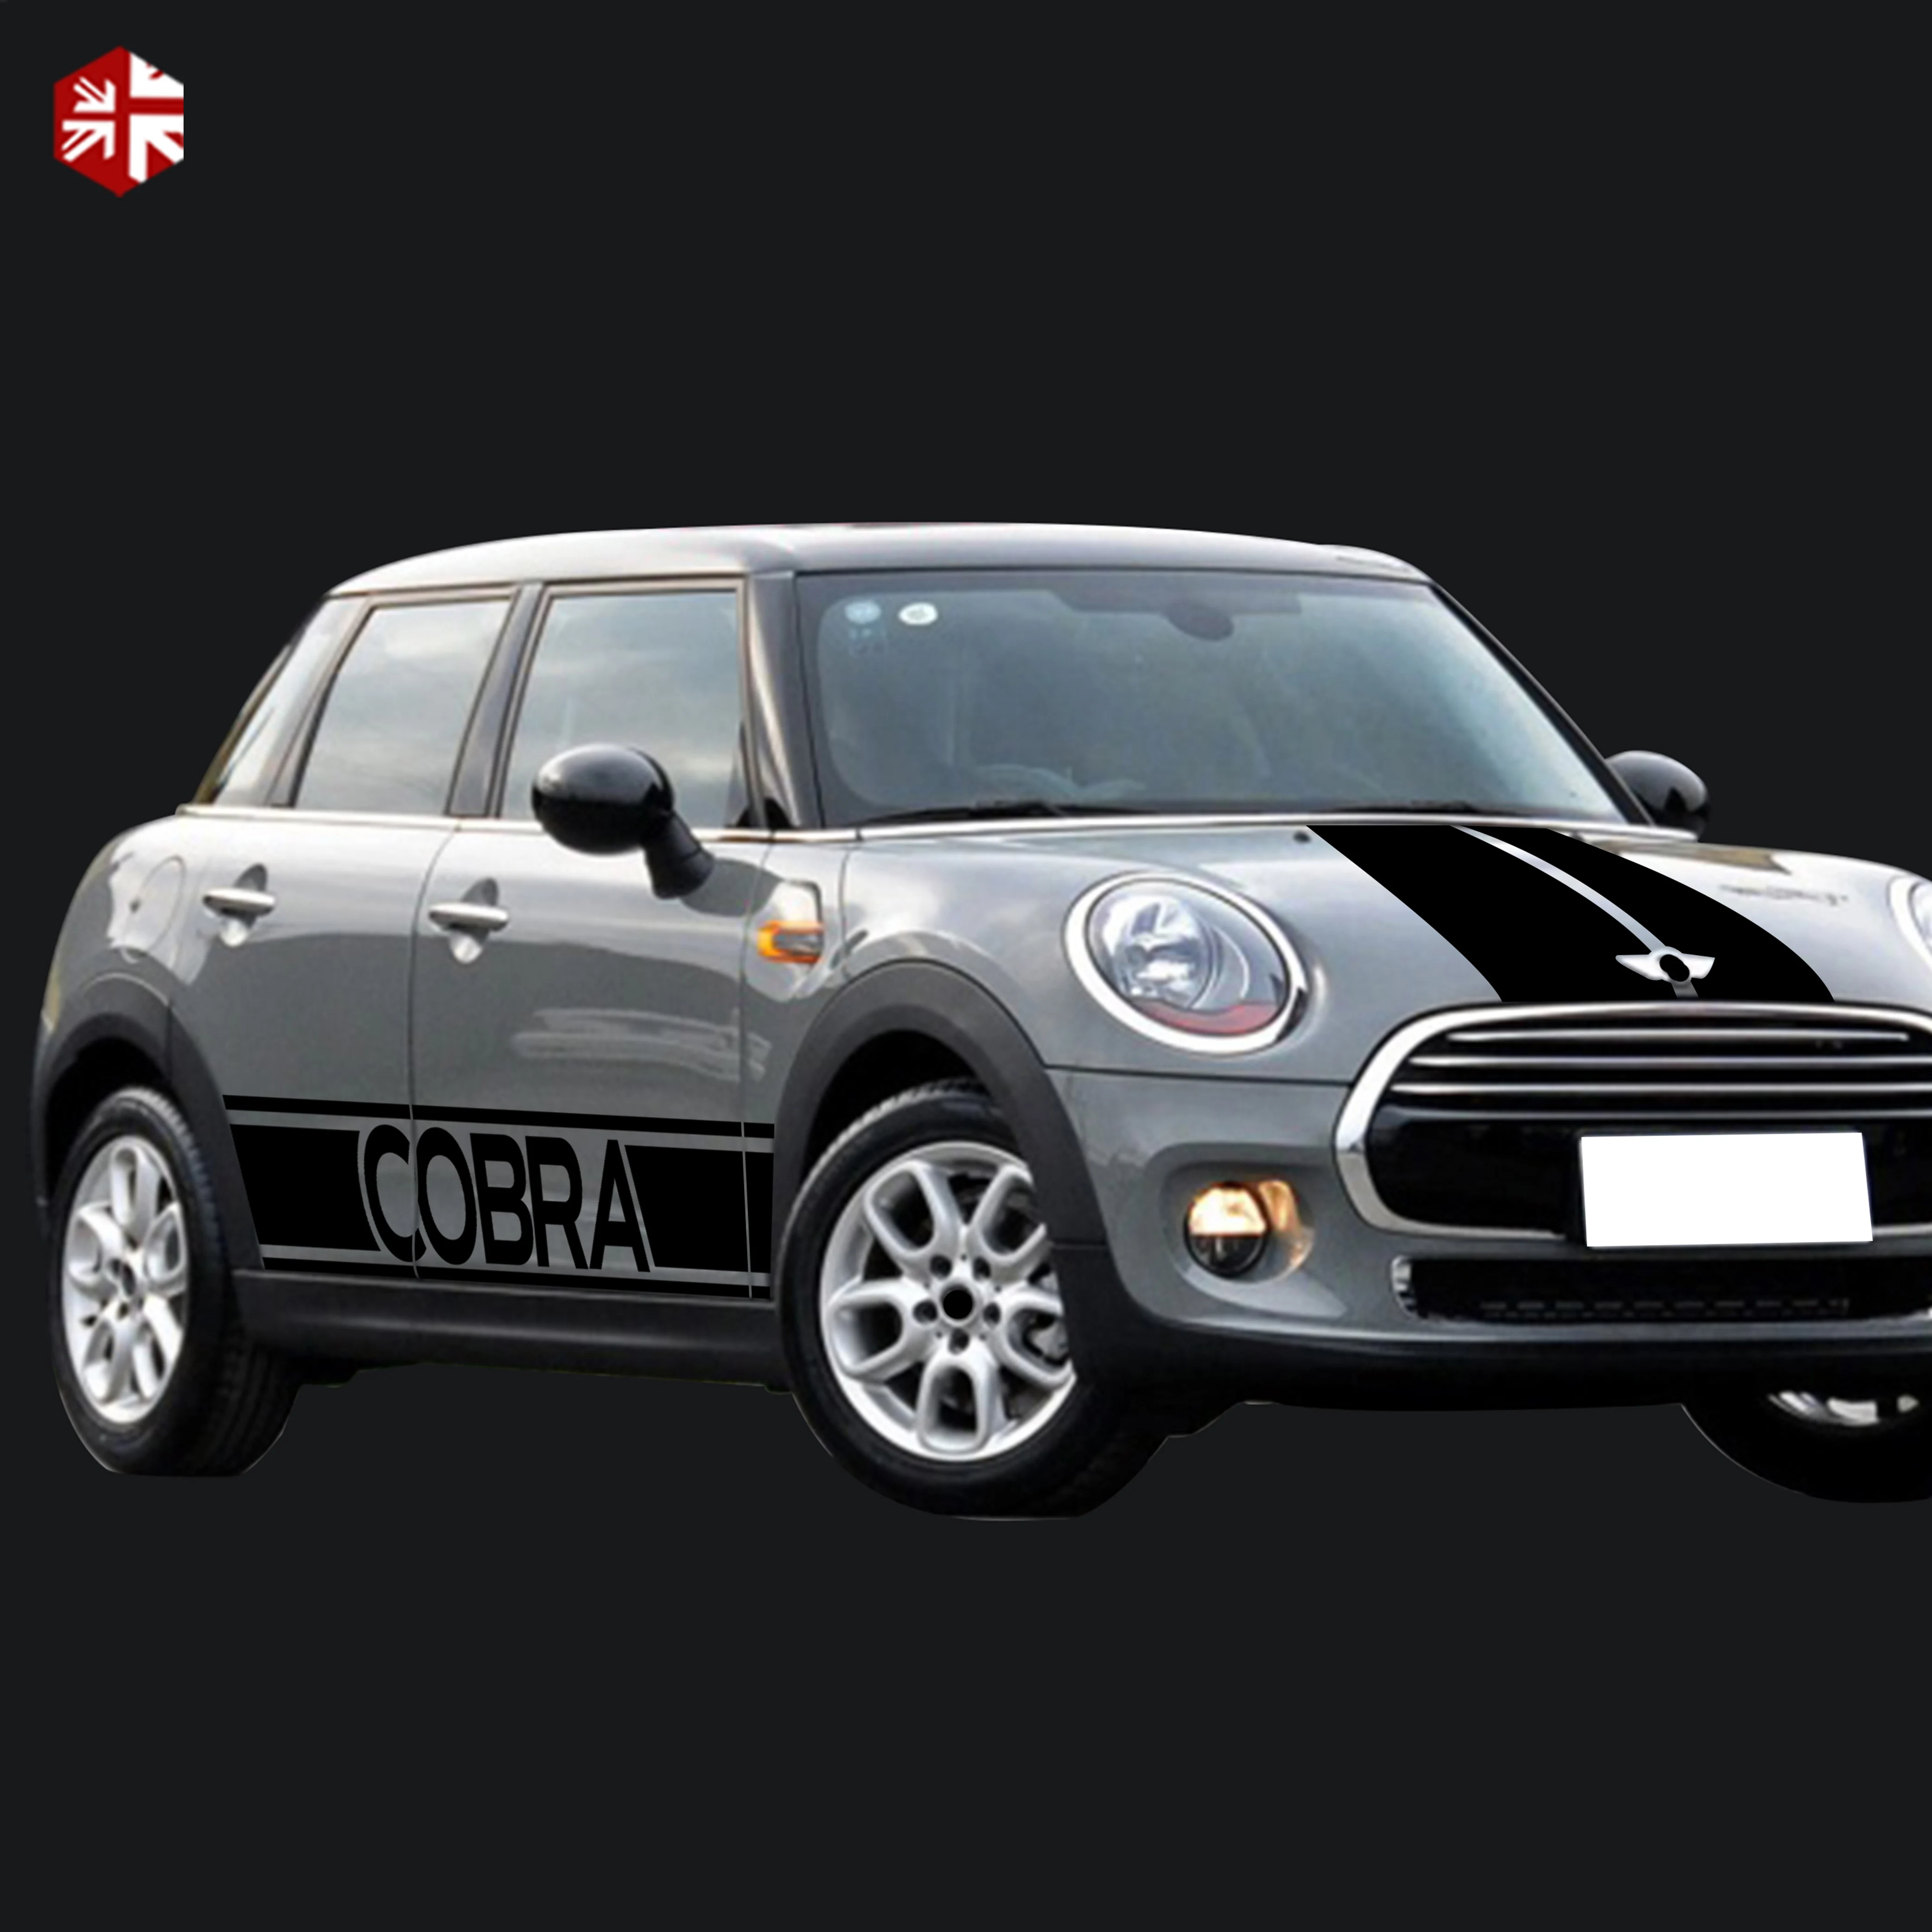 Car Hood Bonnet Roof Rear Trunk Engine Cover Side Stripe Sticker Body Decal For MINI Cooper S F55 5-door JCW One Accessories